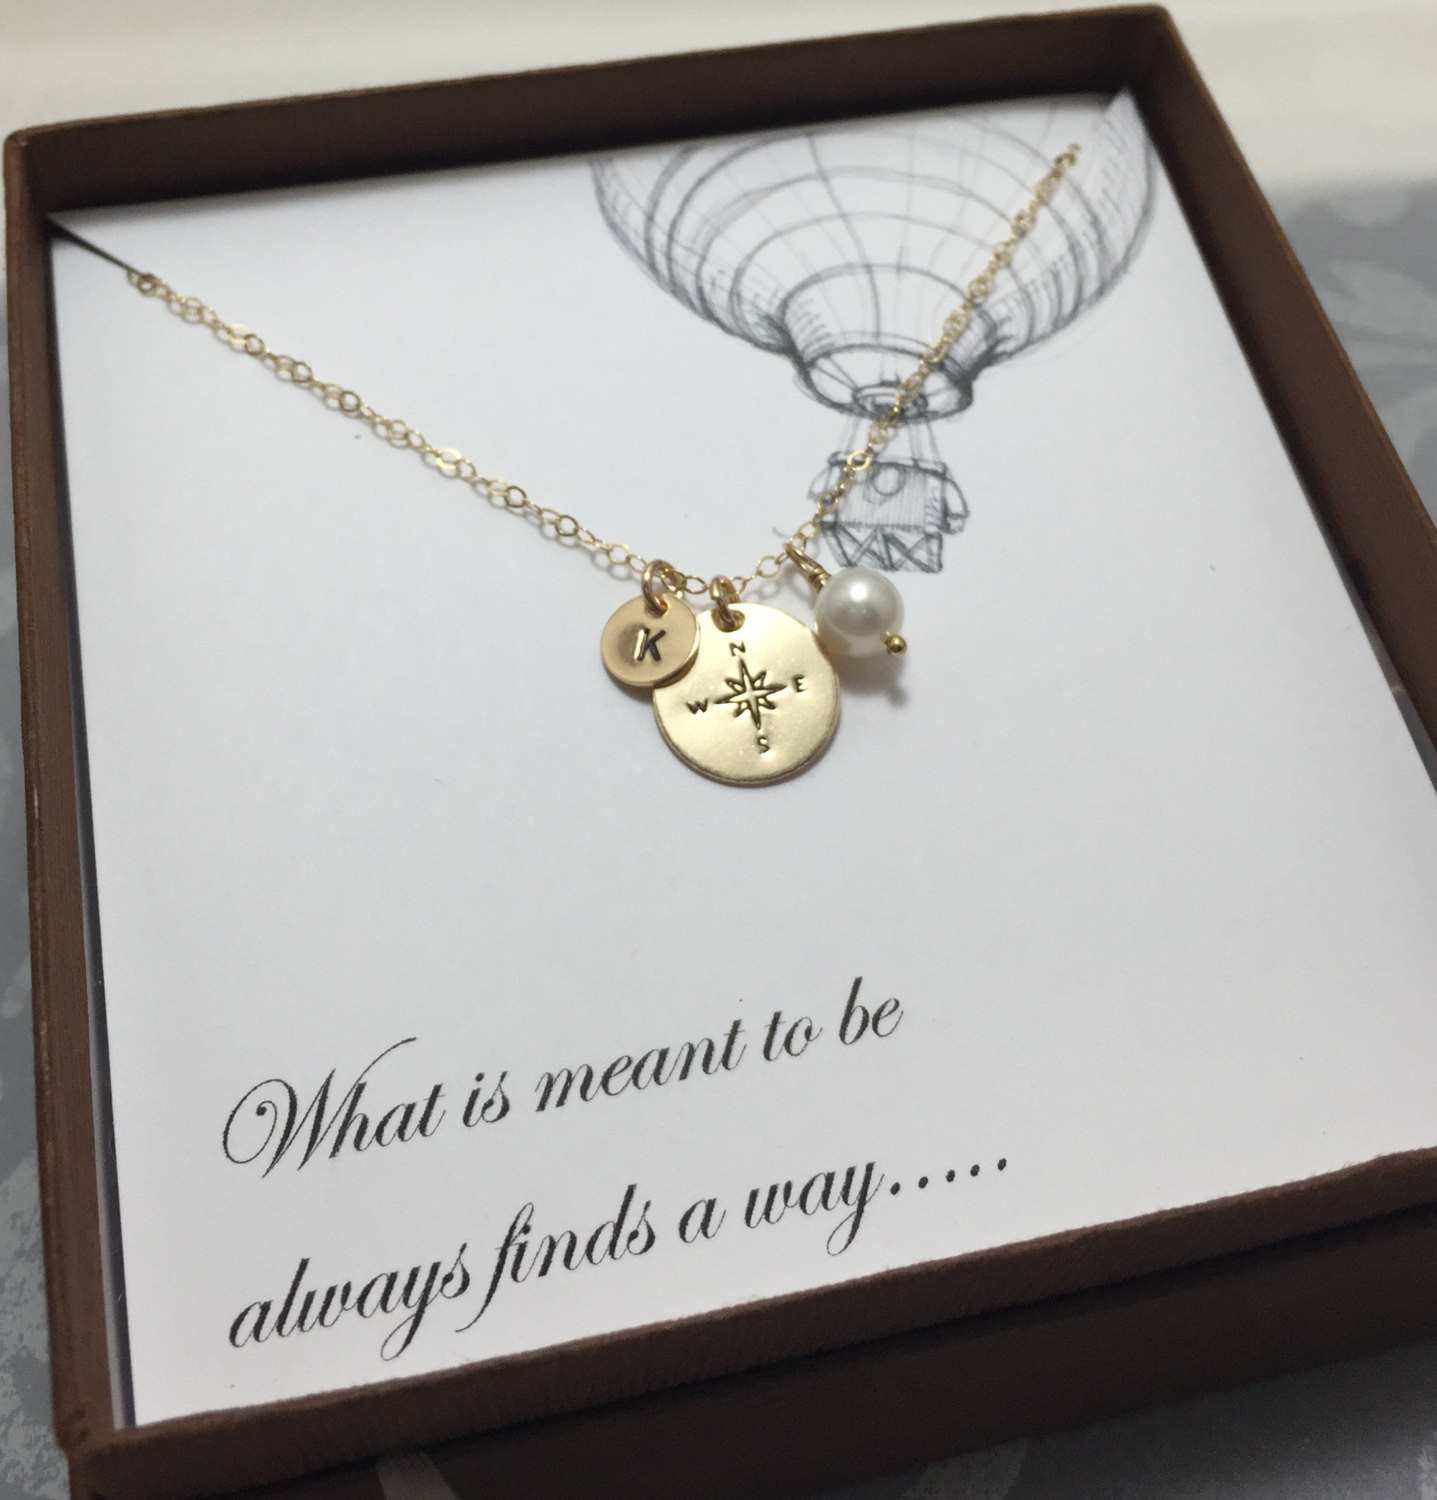 Graduation Jewelry Gift Ideas For Her
 Graduation Gift for Her Best Friends Jewelry Personalized